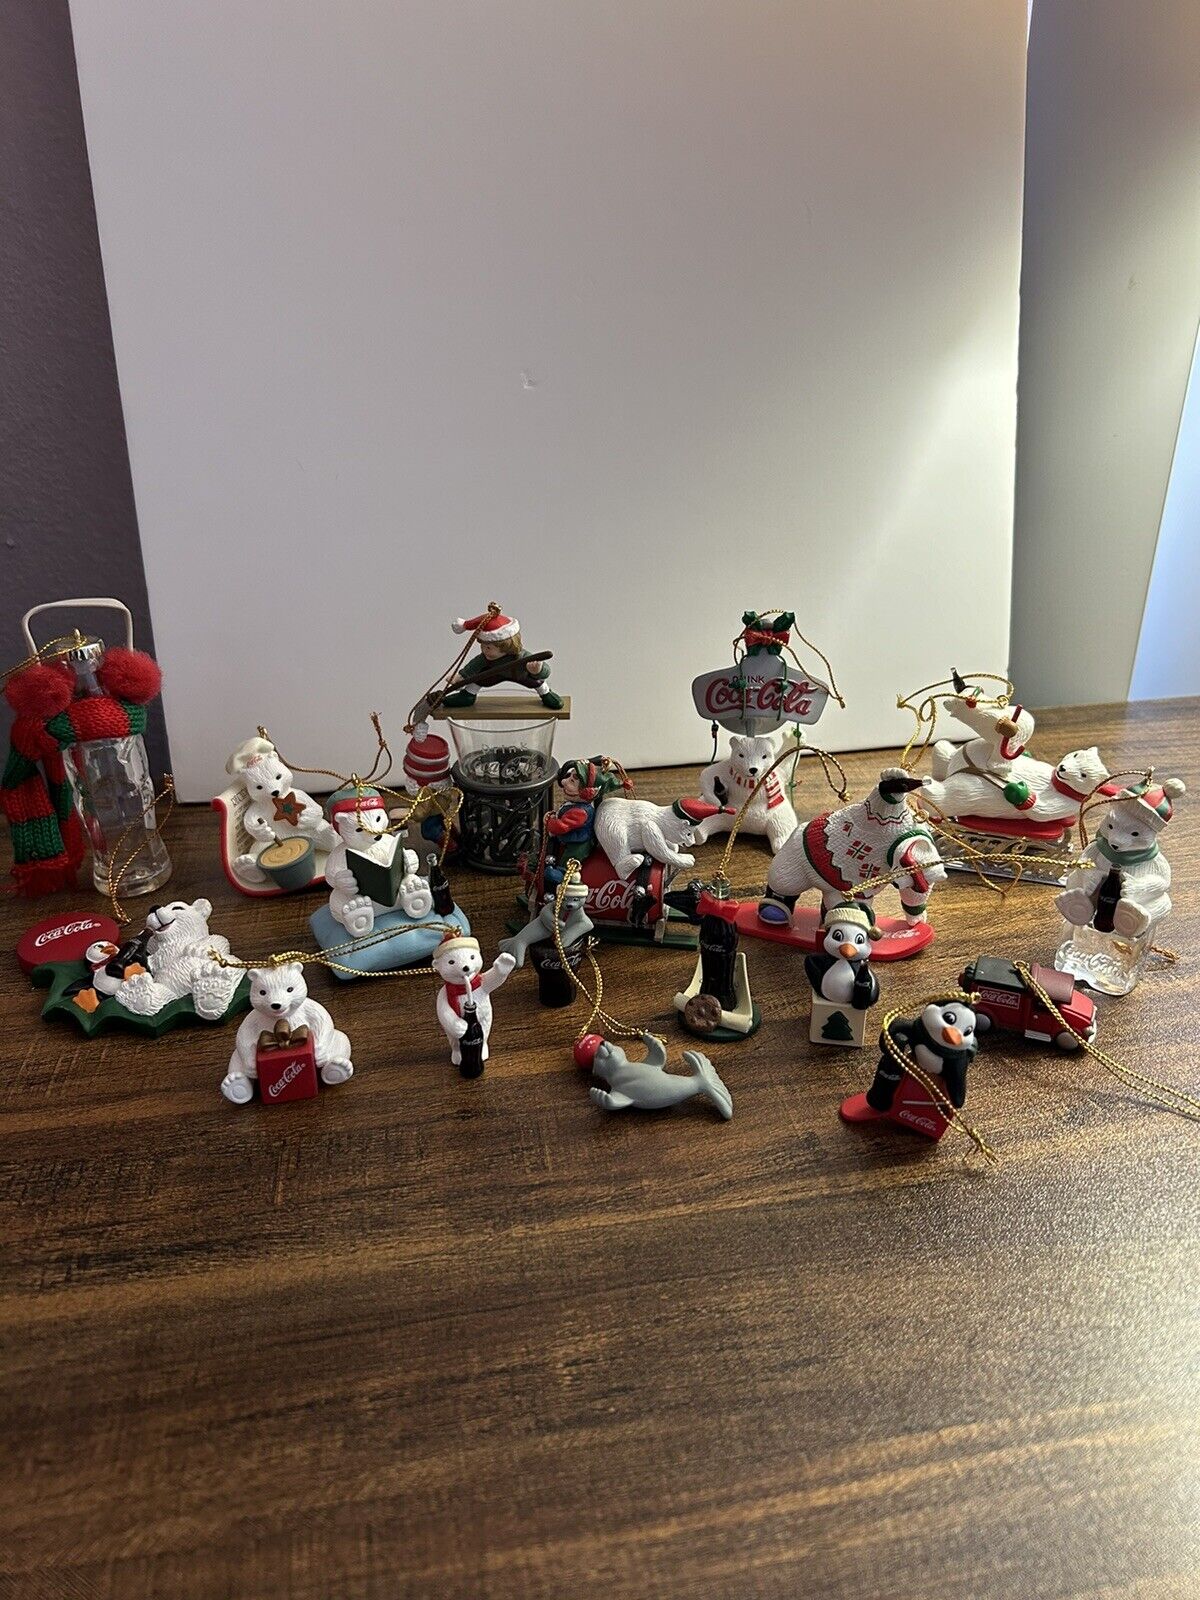 Lot of 18 Coca-Cola Christmas Ornaments. Range From 4” To 1”